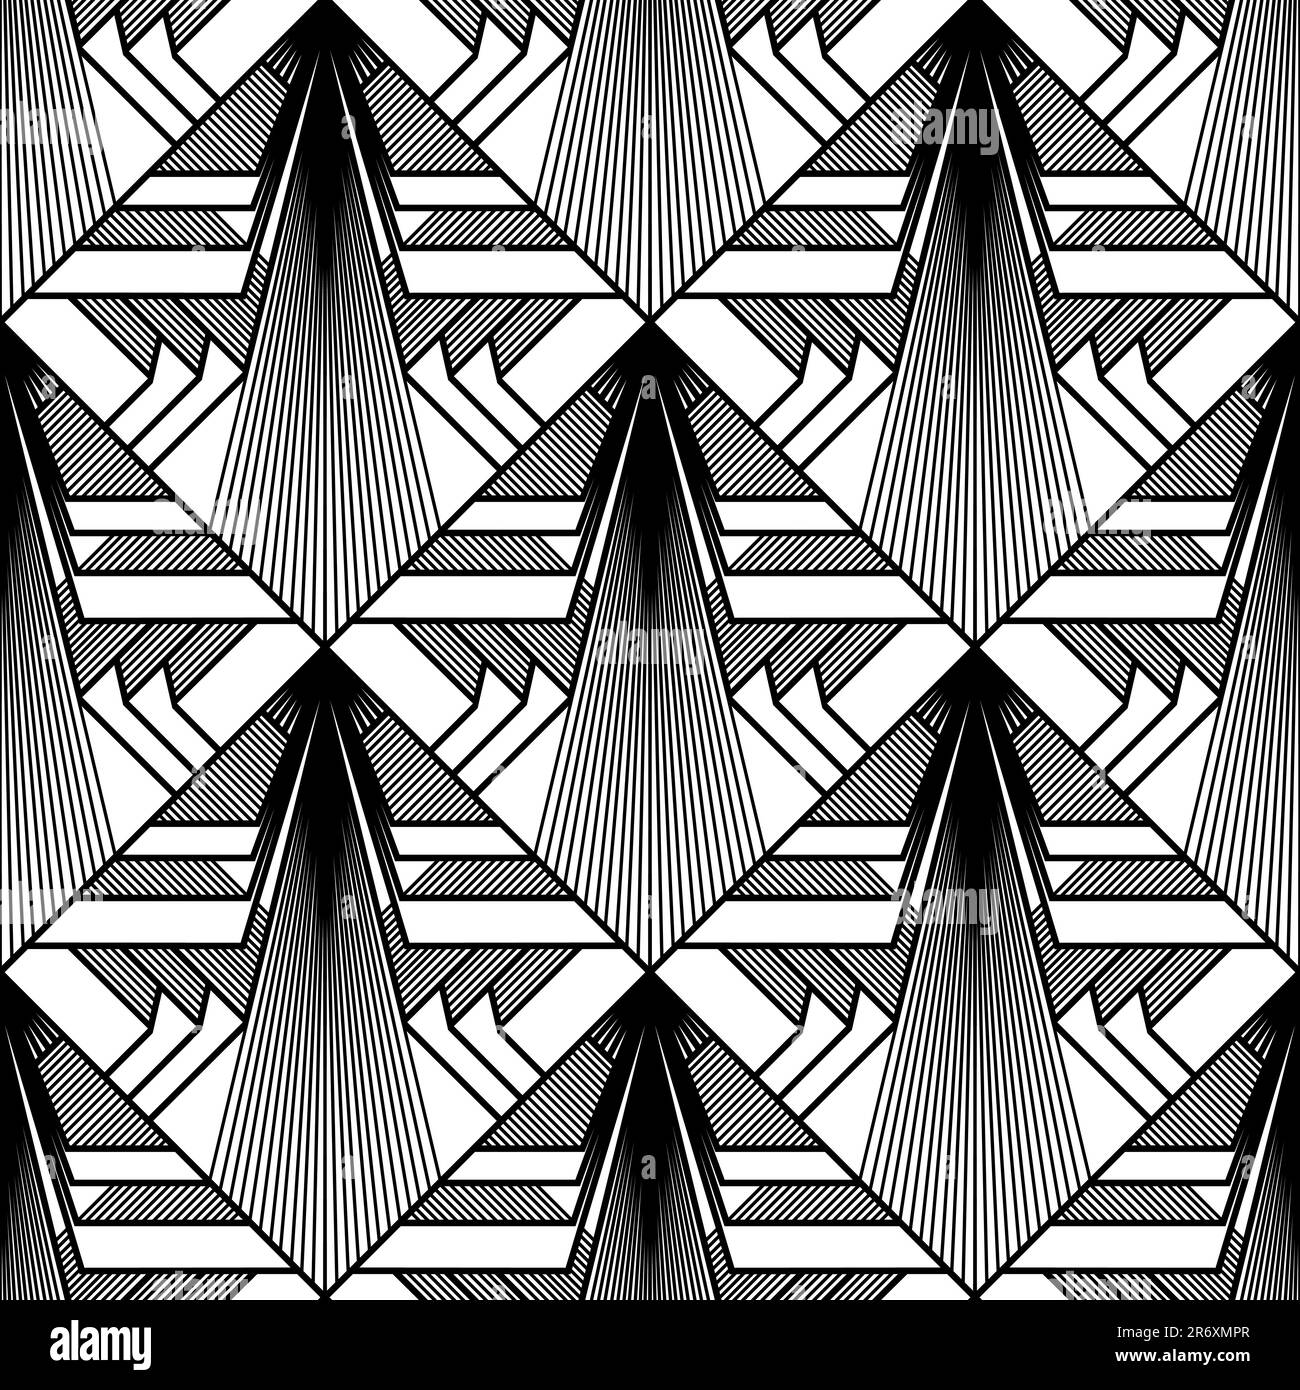 Art Deco Wallpaper. Black and white seamless pattern in roaring ...